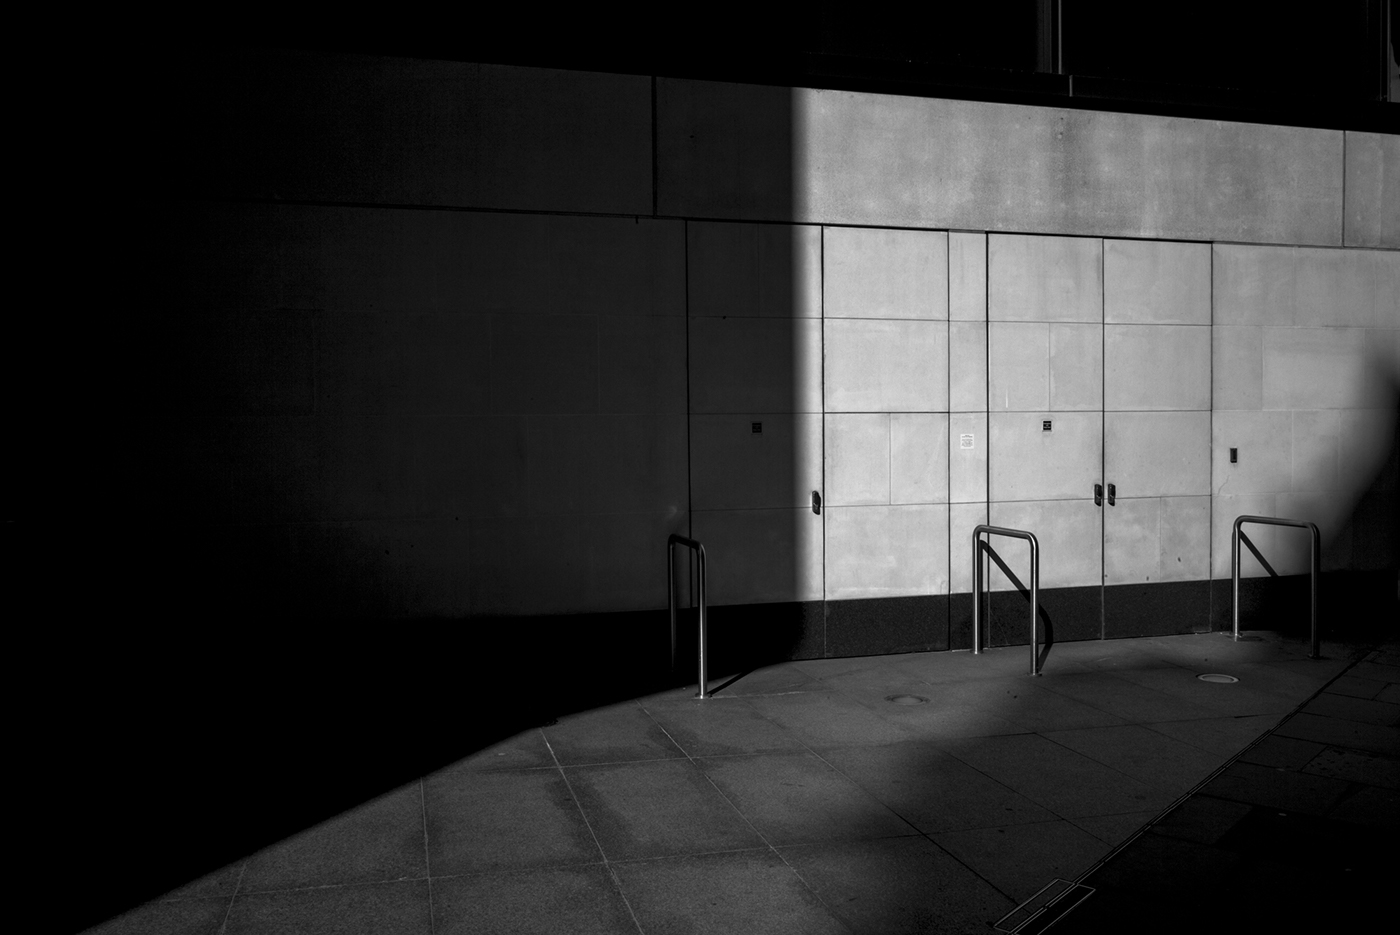 black and white fragments city Urban modern architecture light shadow